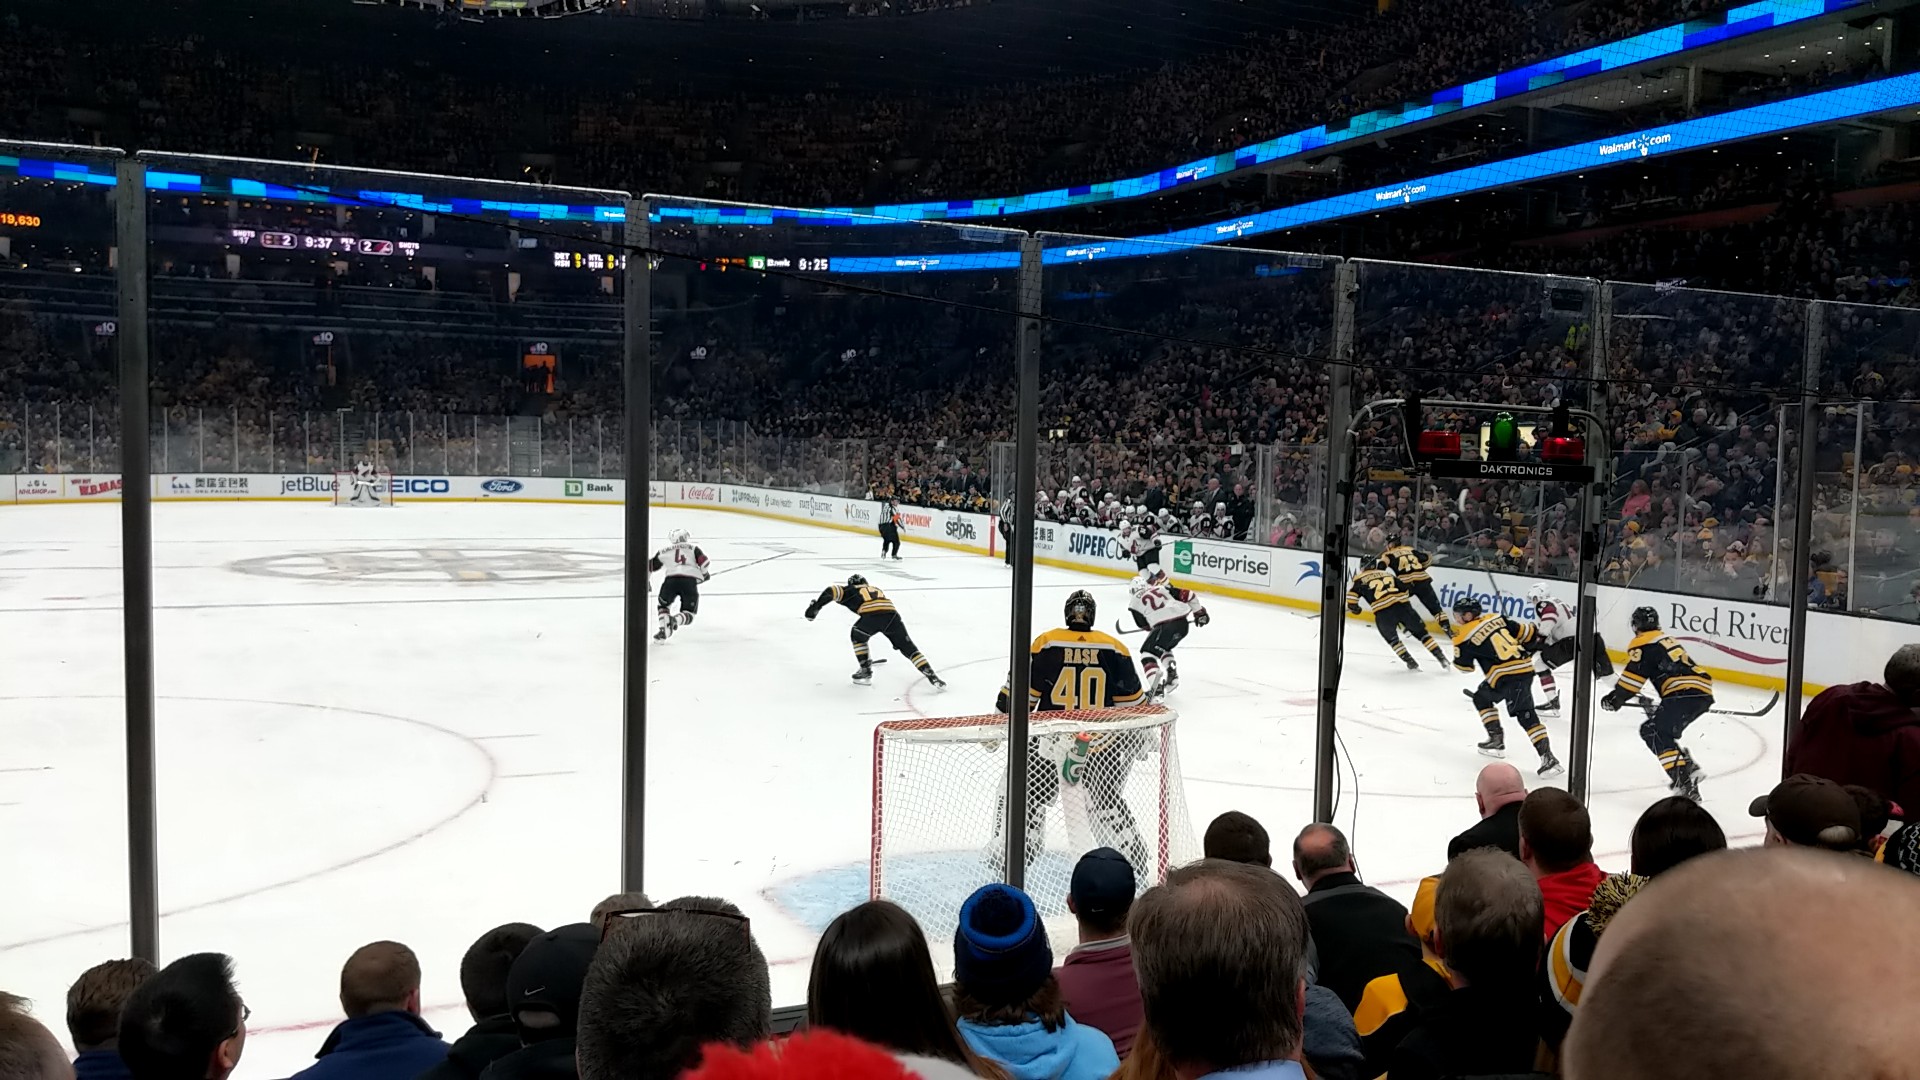 loge 7, row 6 seat view  for hockey - td garden